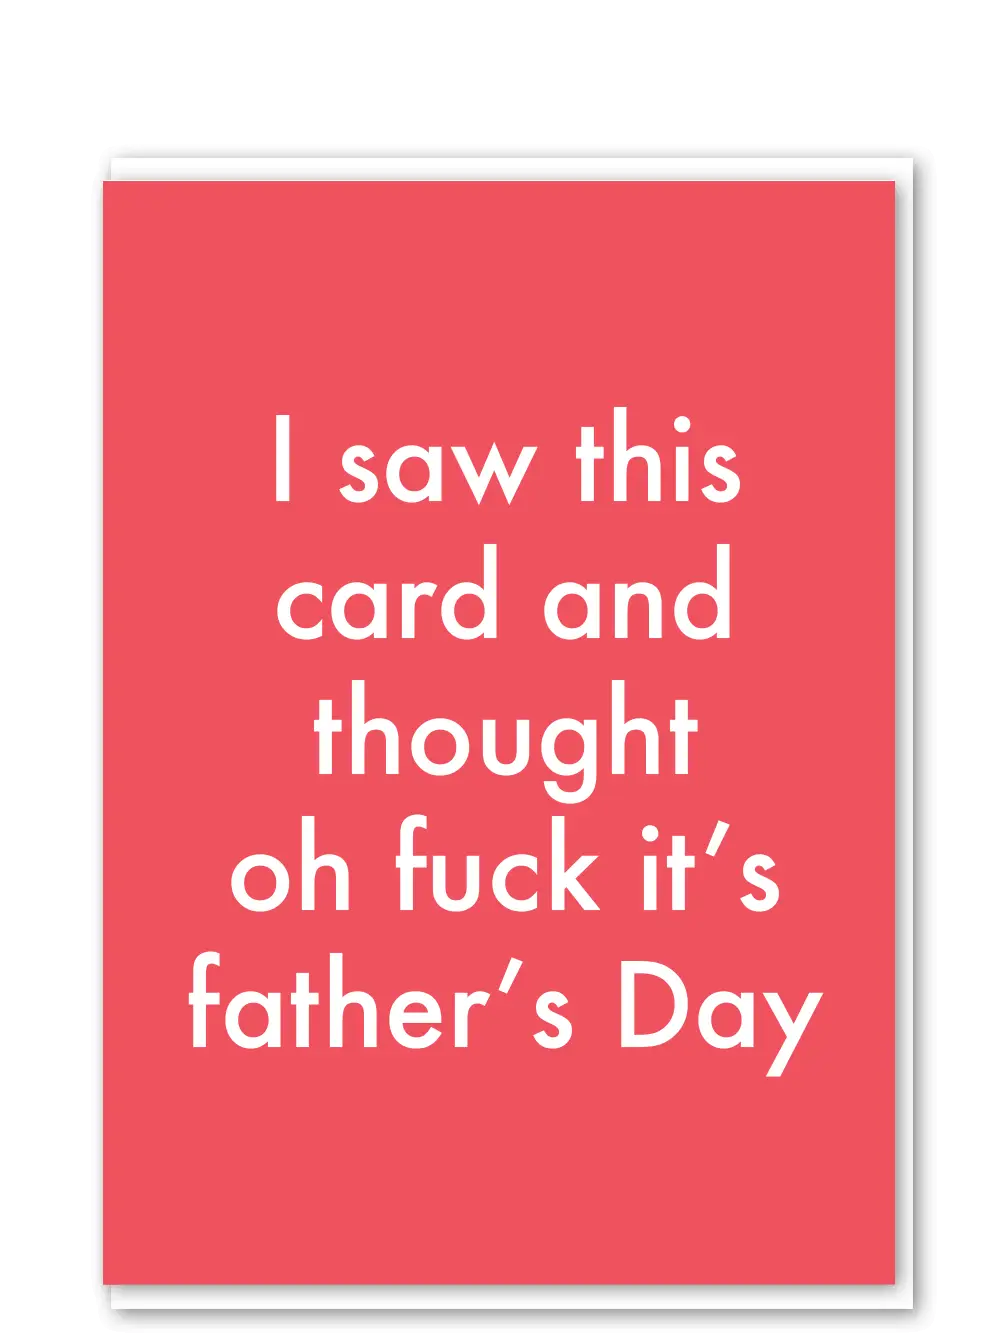 Fuck it’s Father’s Day